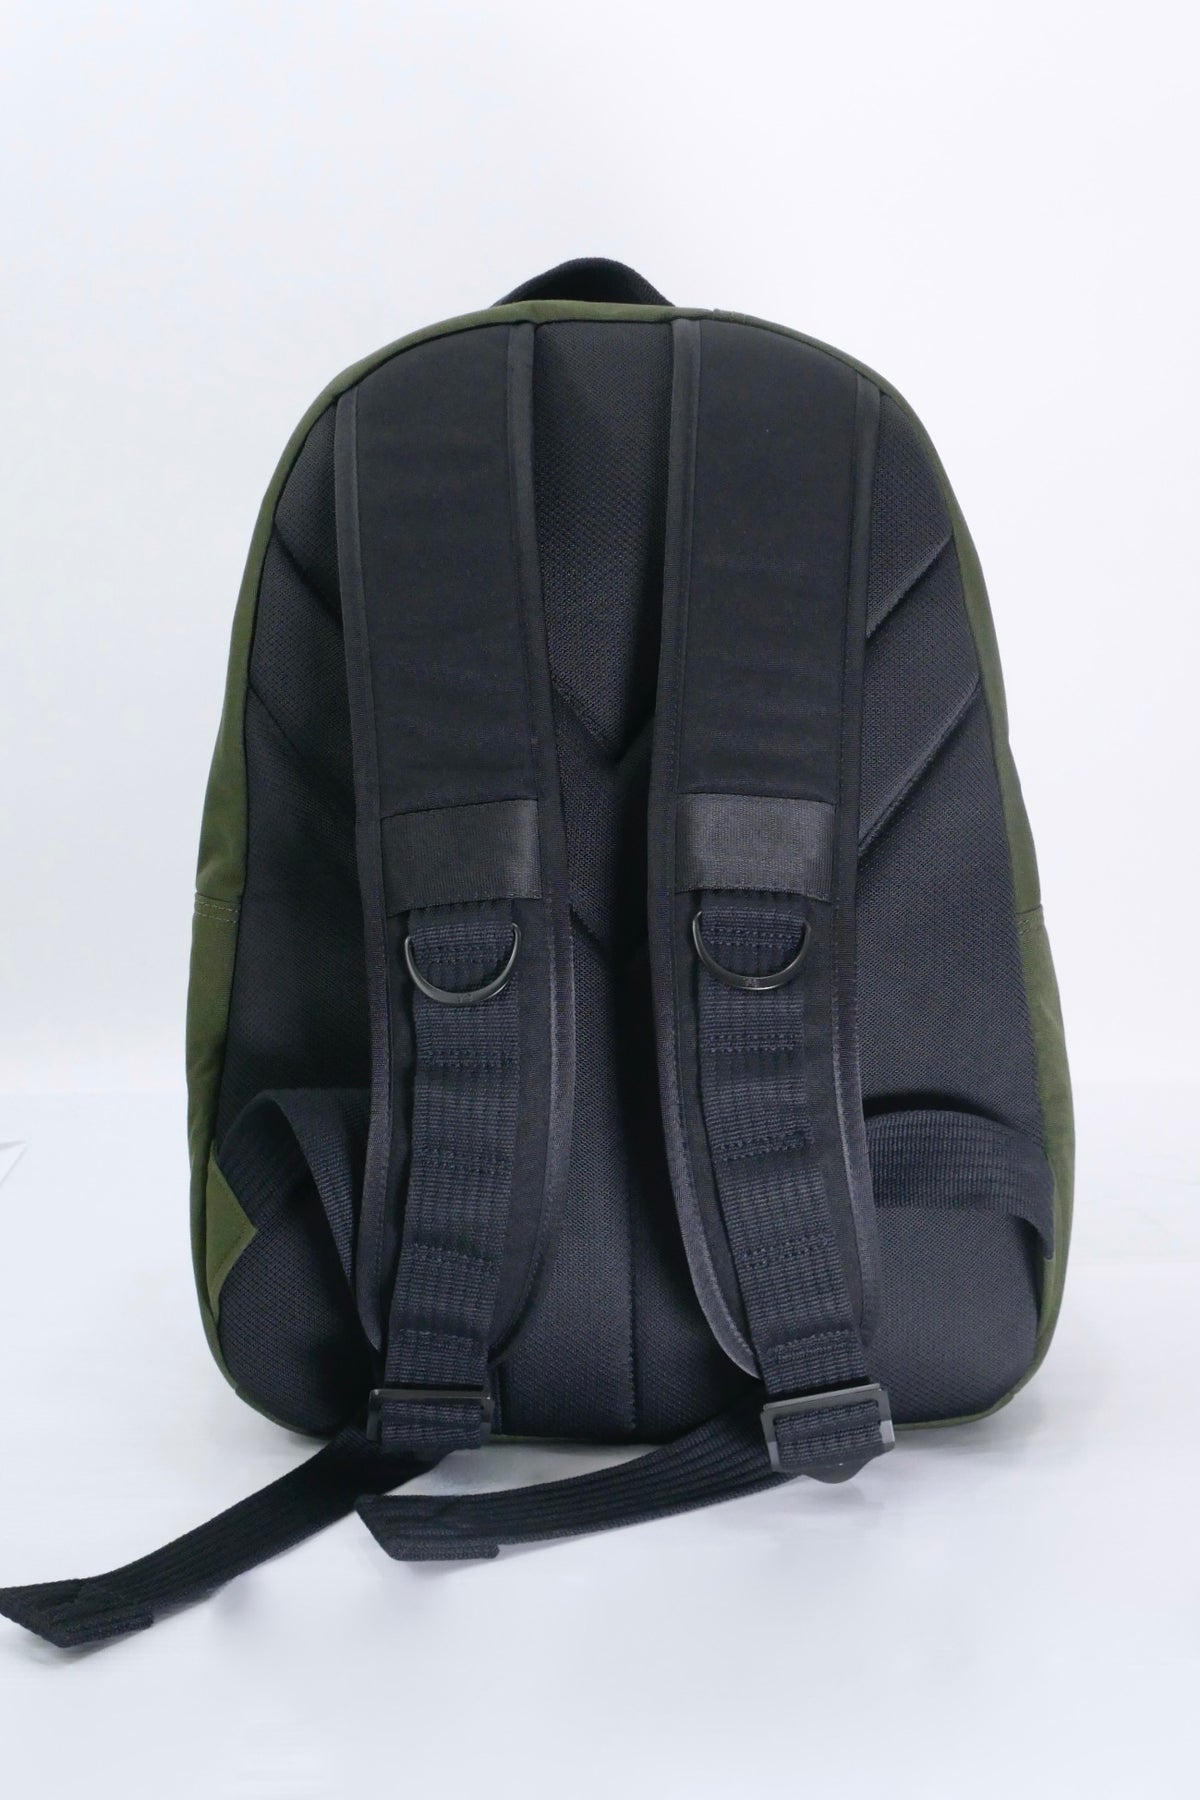 Y-3 Classic Backpack - Night Cargo